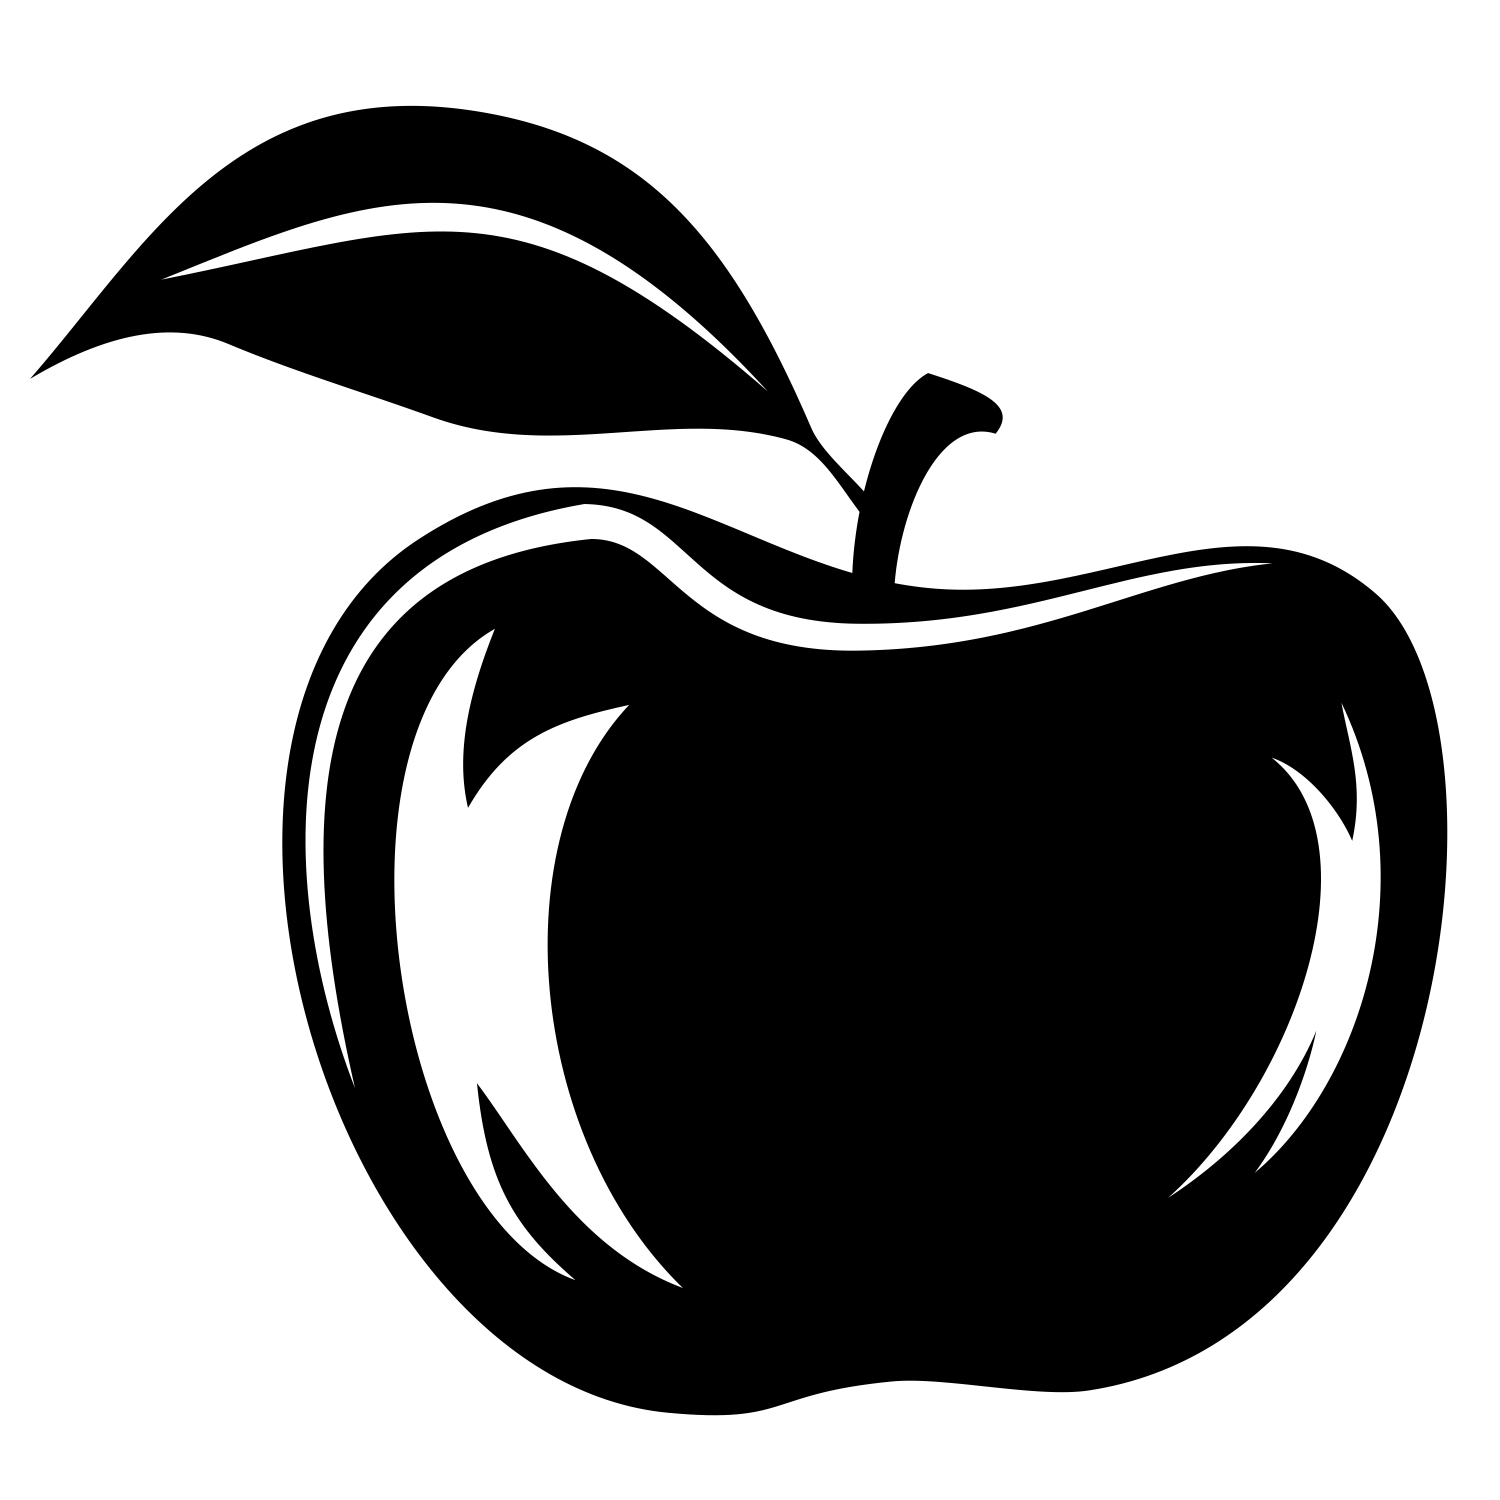 vector free download apple - photo #5